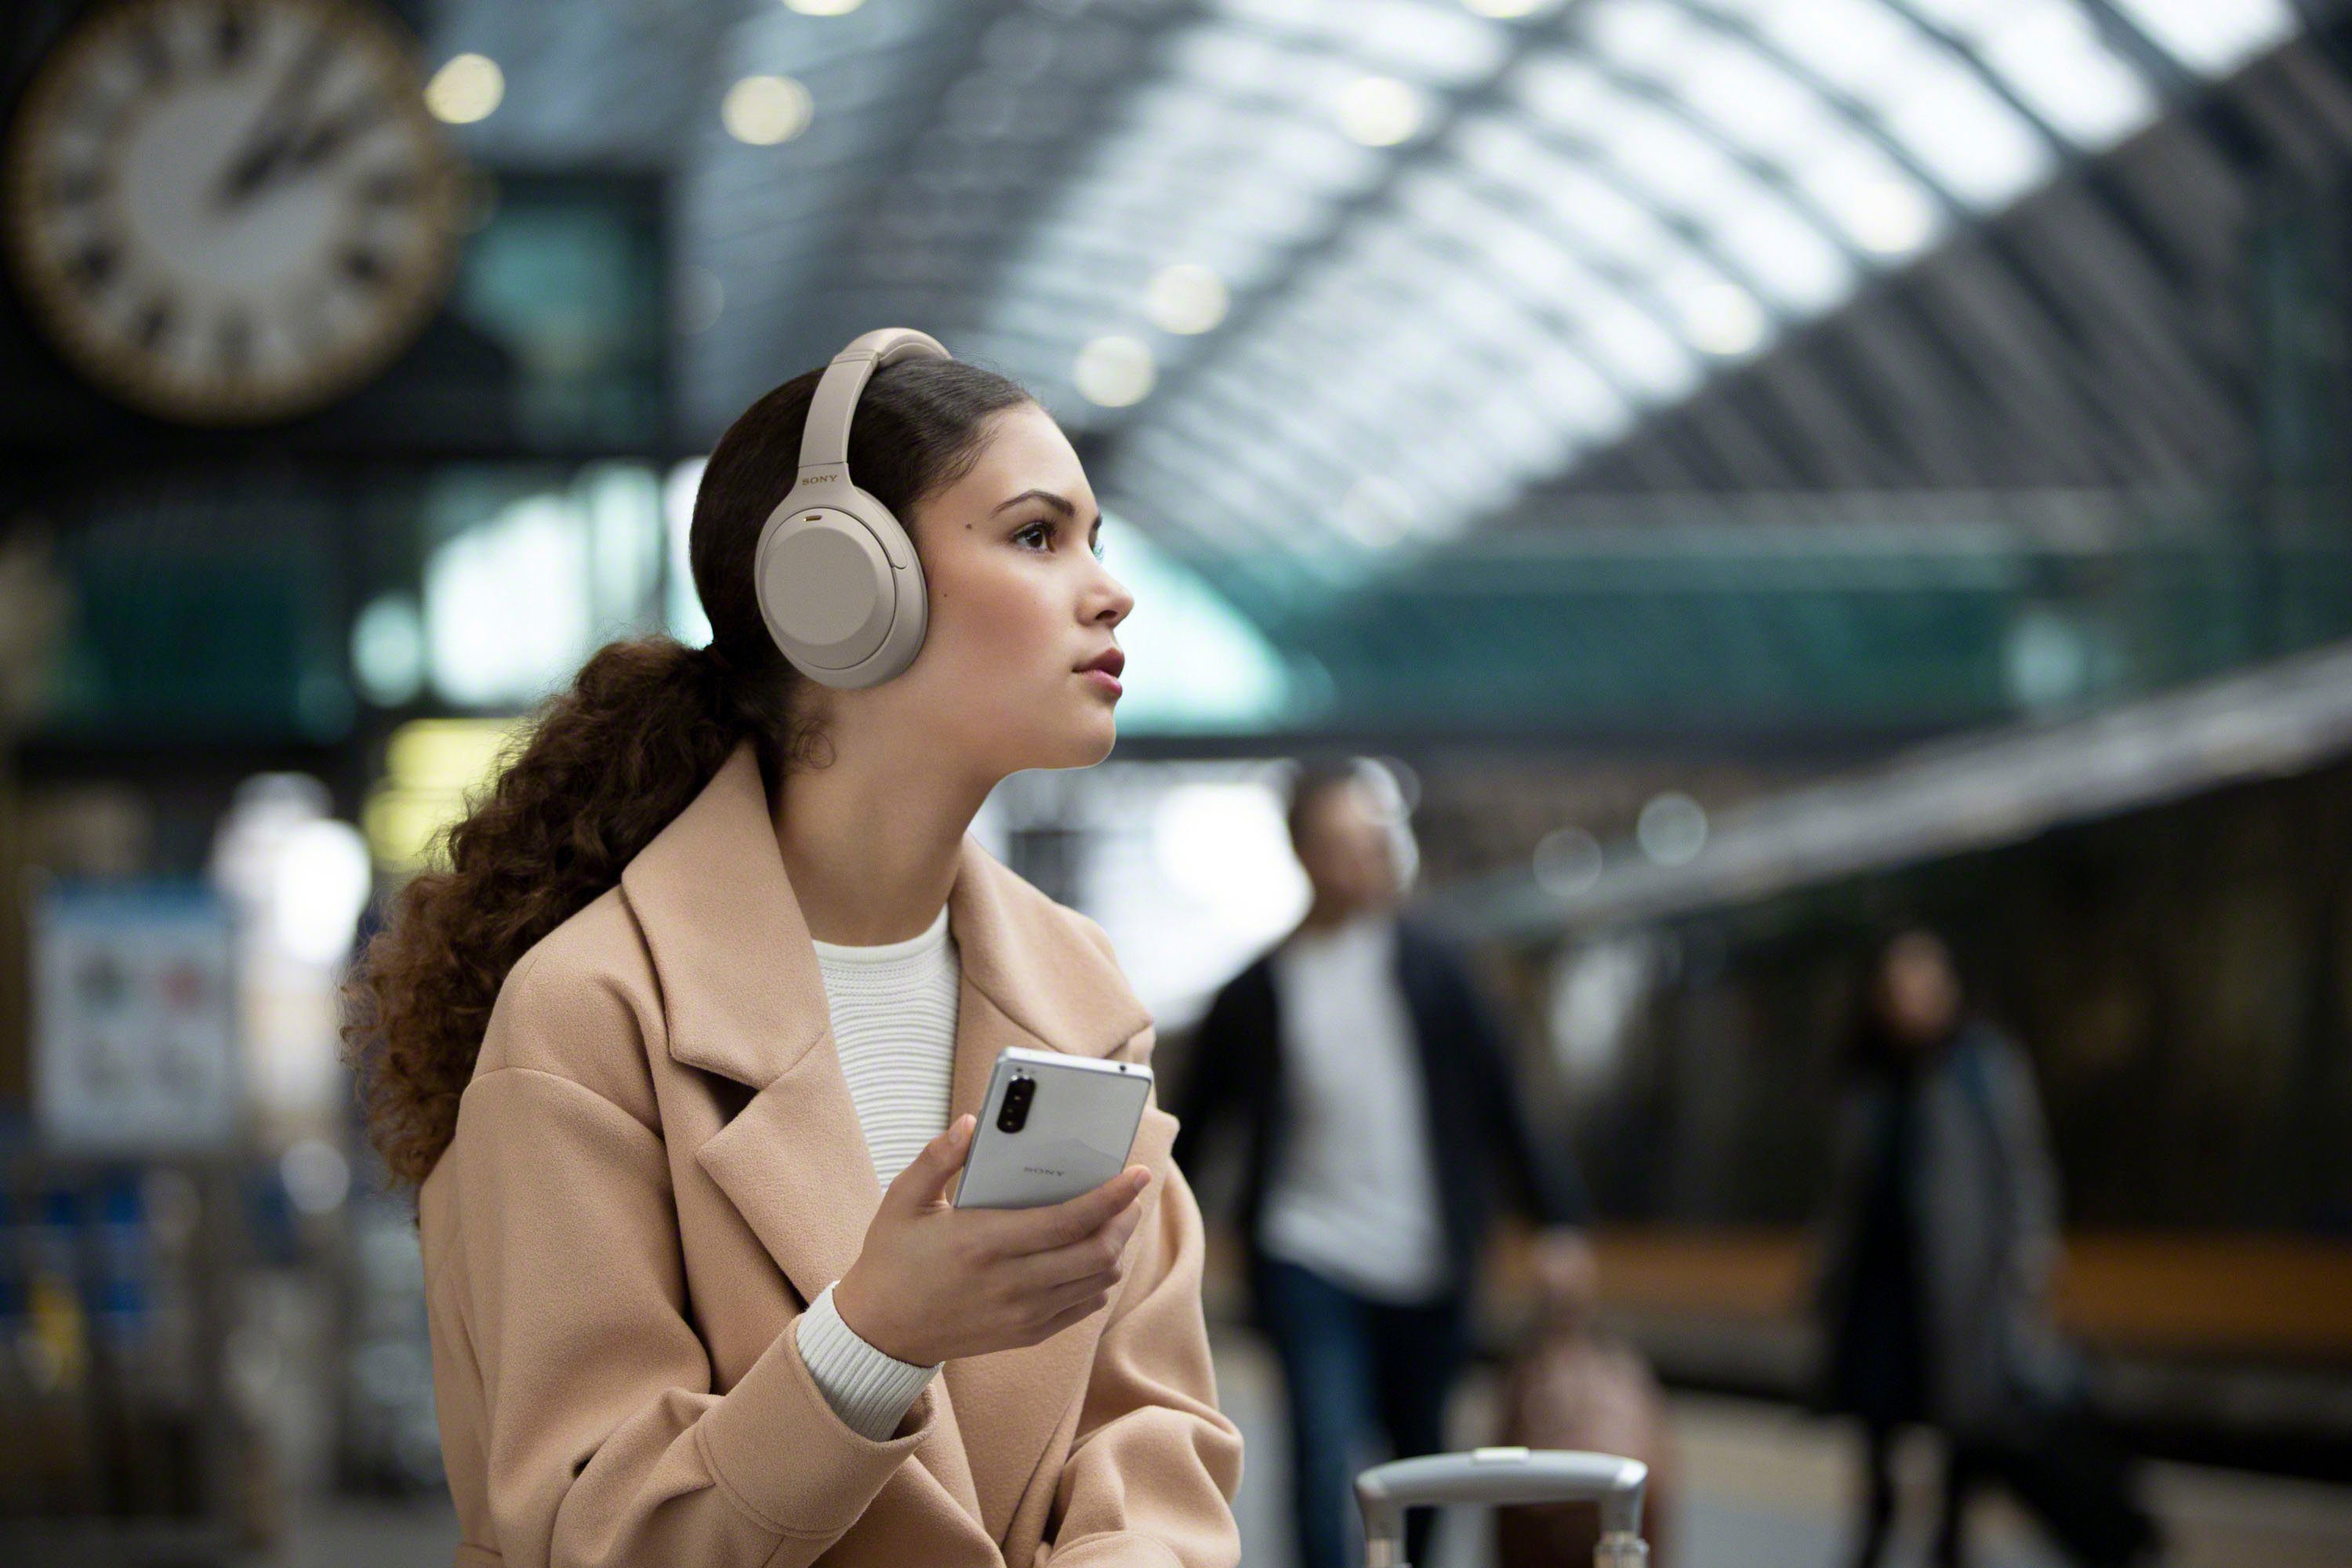 NFC, Sony Bluetooth, Touch One-Touch via Over-Ear-Kopfhörer (Noise-Cancelling, NFC, Sensor, WH-1000XM4 Schnellladefunktion) Verbindung kabelloser Silber